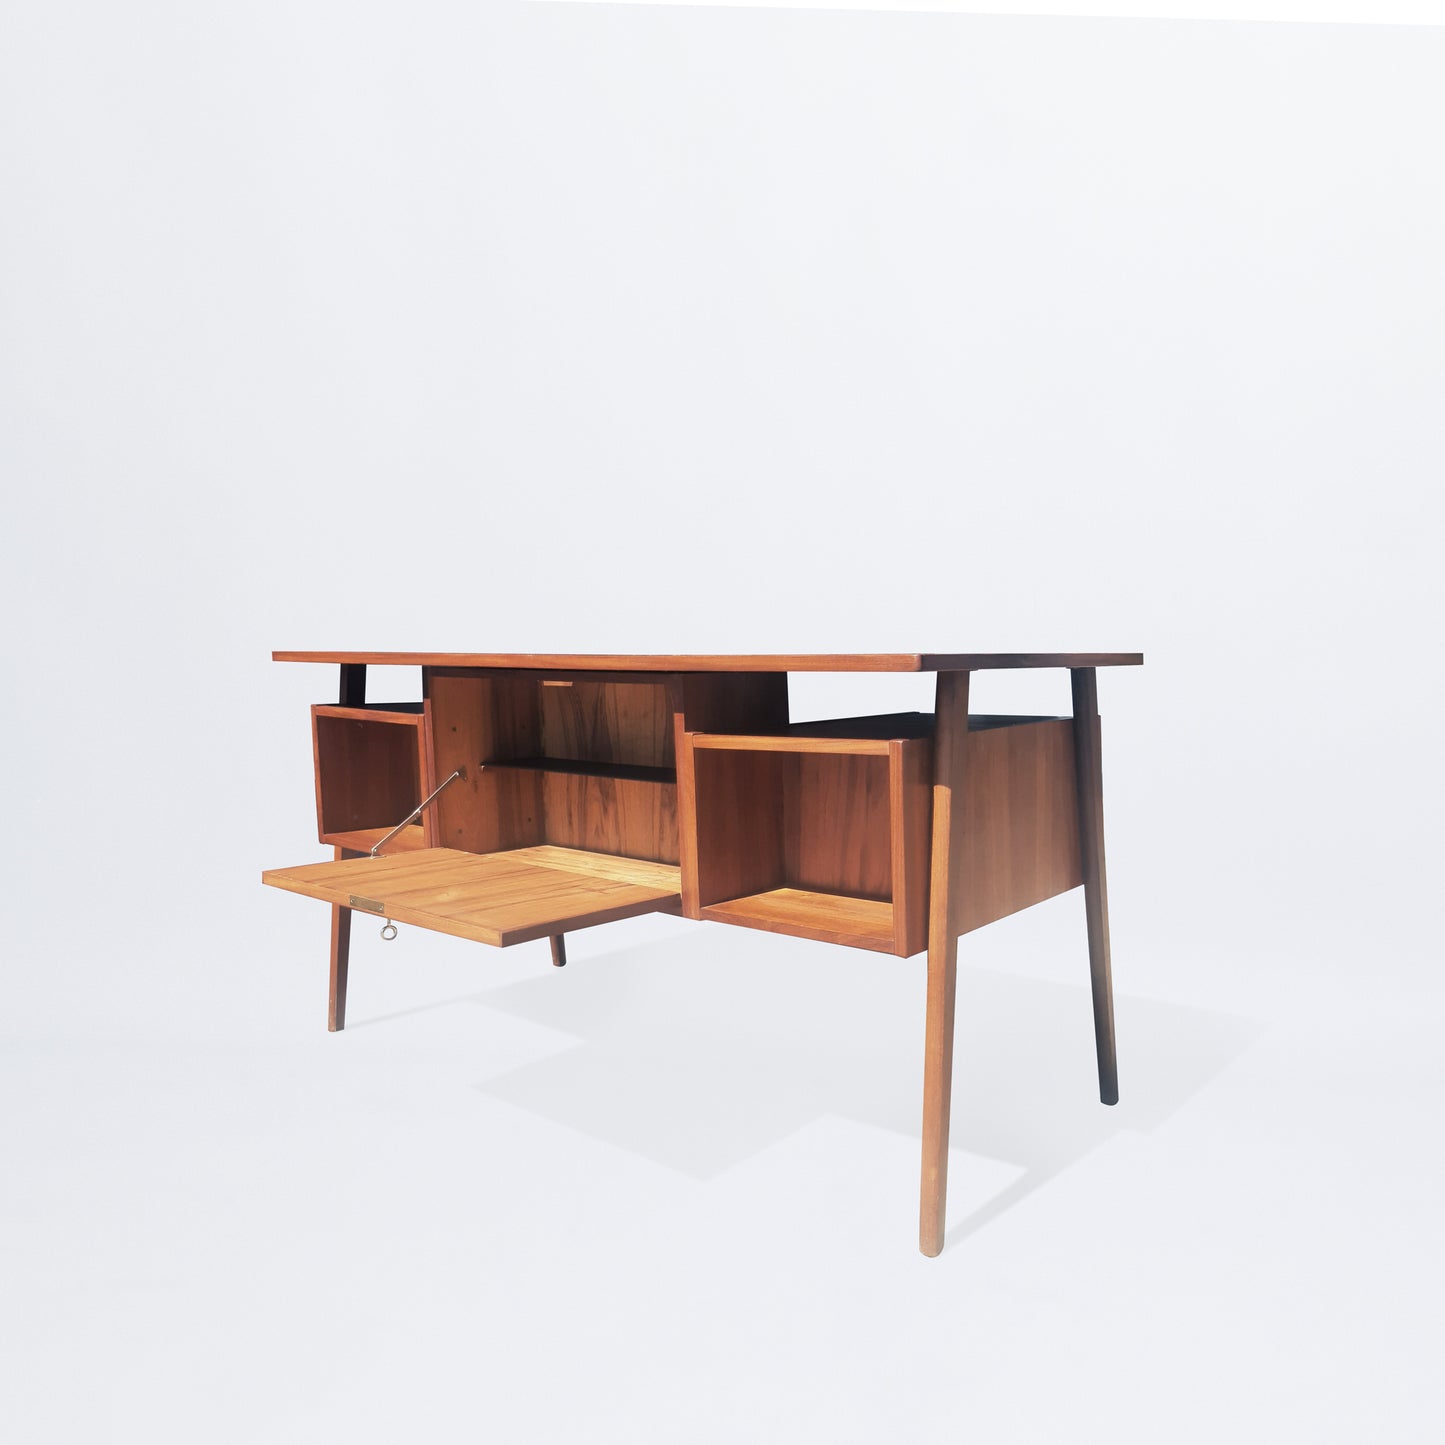 Desk with 4 drawers, storage and shelves